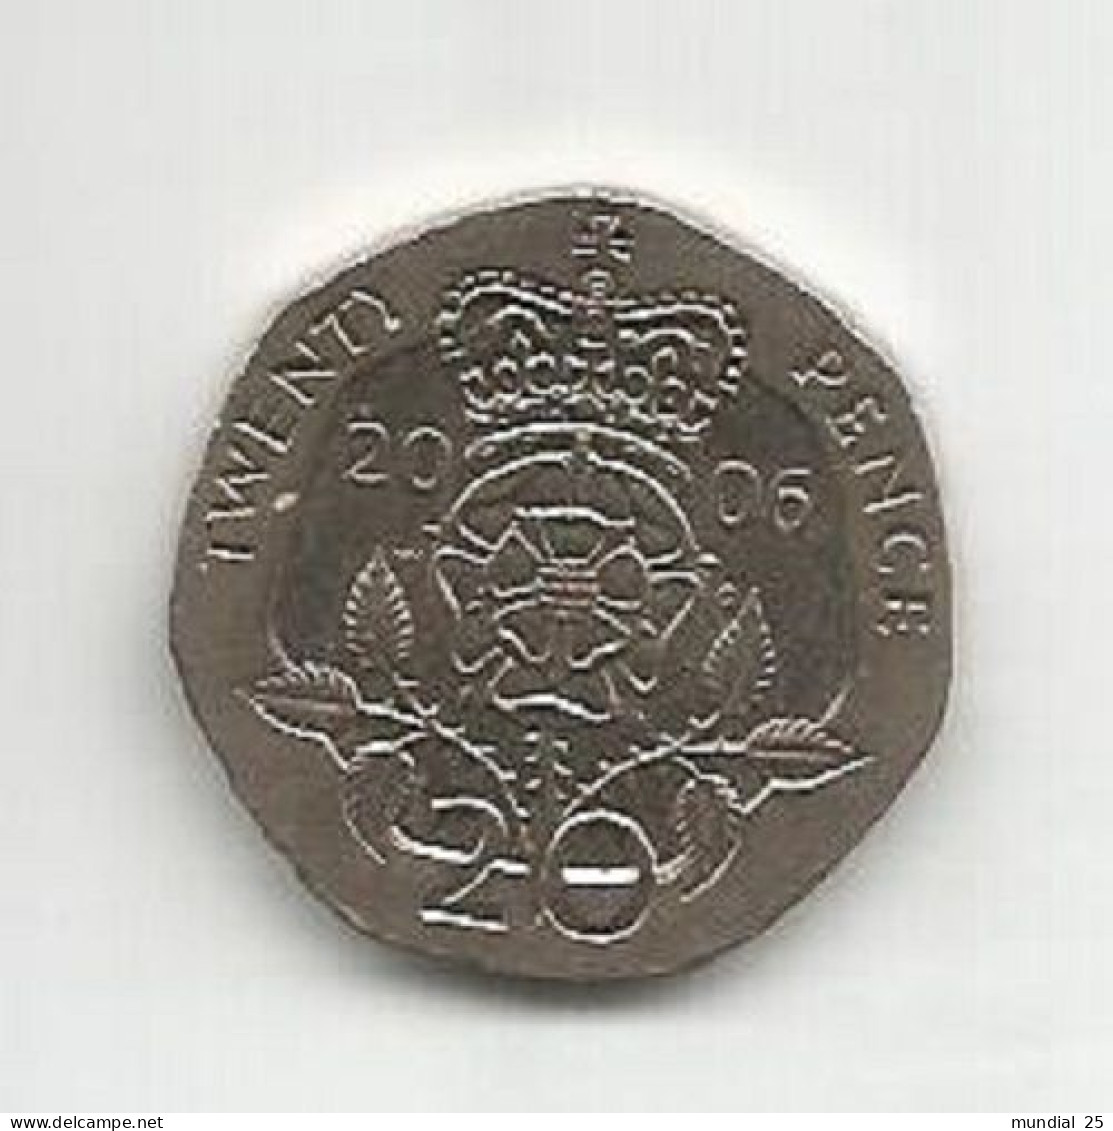 GREAT BRITAIN 20 PENCE 2006 - 20 Pence